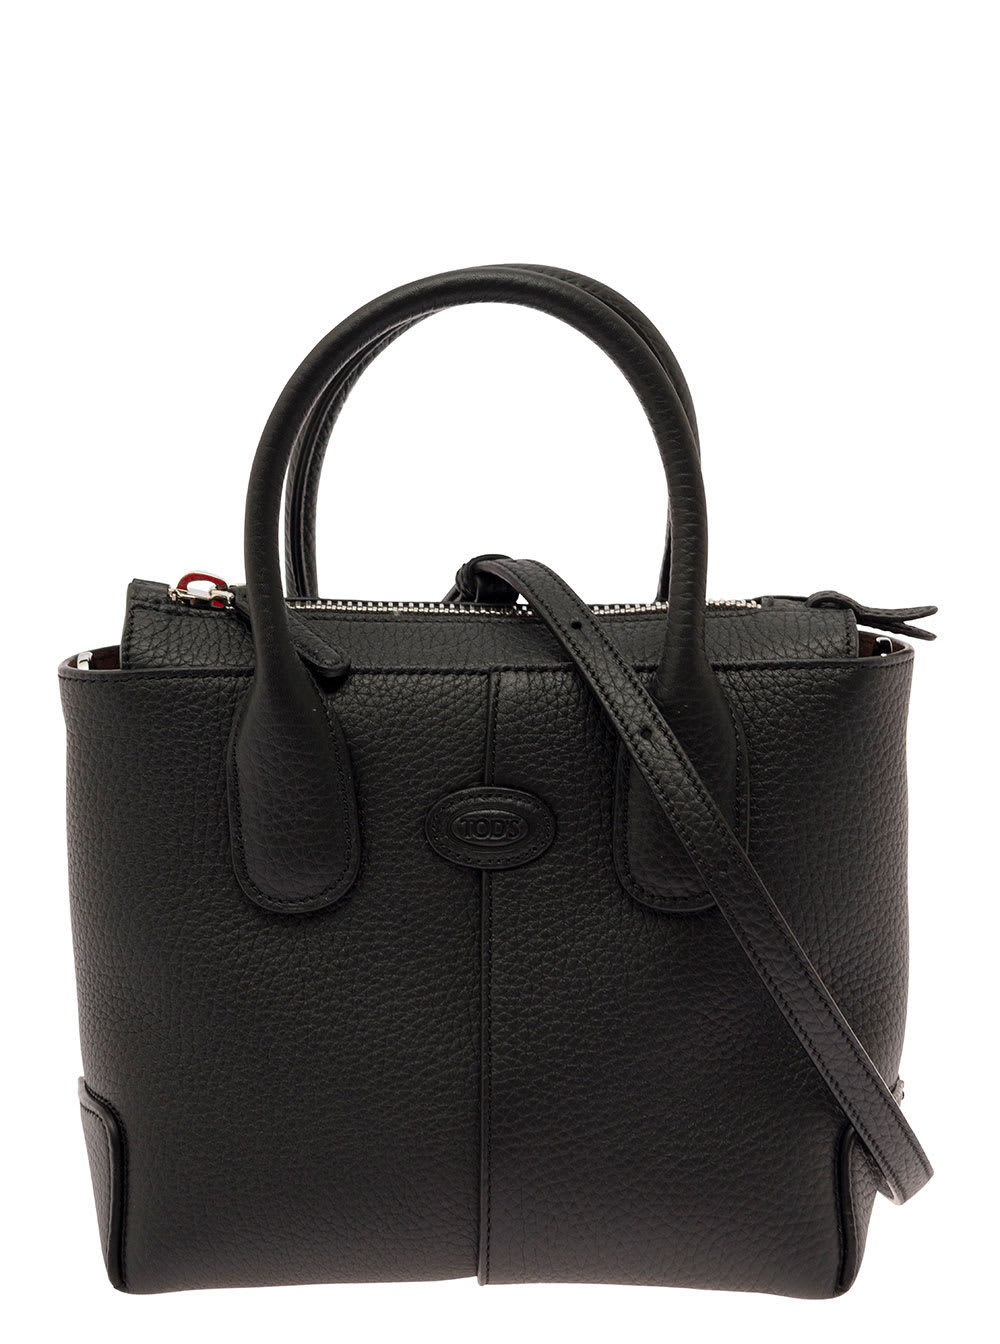 TST Medium Leather Tote Bag in Black - Tods